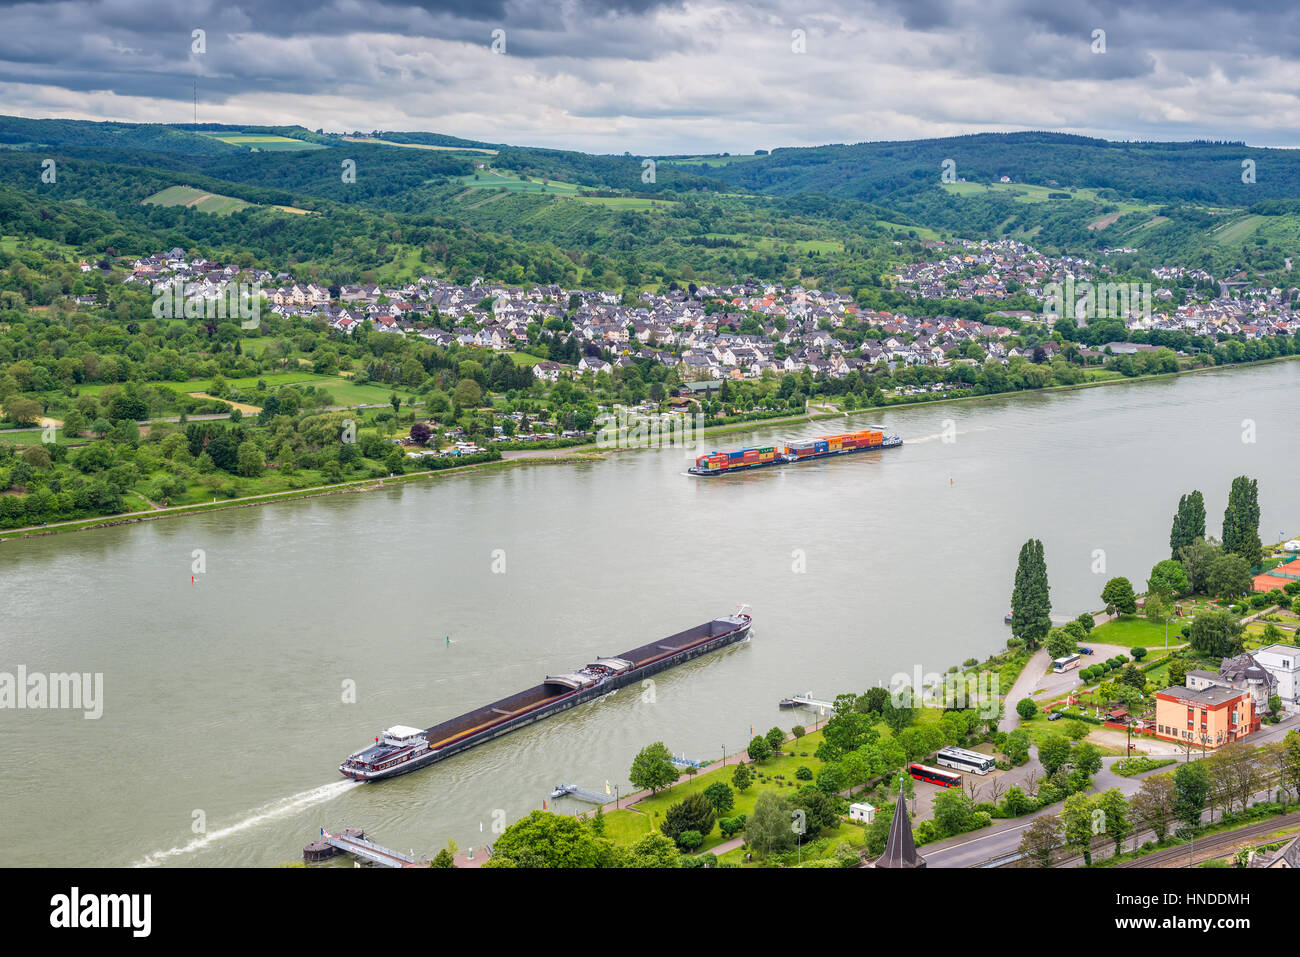 Brey, Germany - May 23, 2016: Сontainer and cargo ship on the Rhine River, Rhine Valley, UNESCO World Heritage Site, Germany. Brey and Rhens in backgr Stock Photo